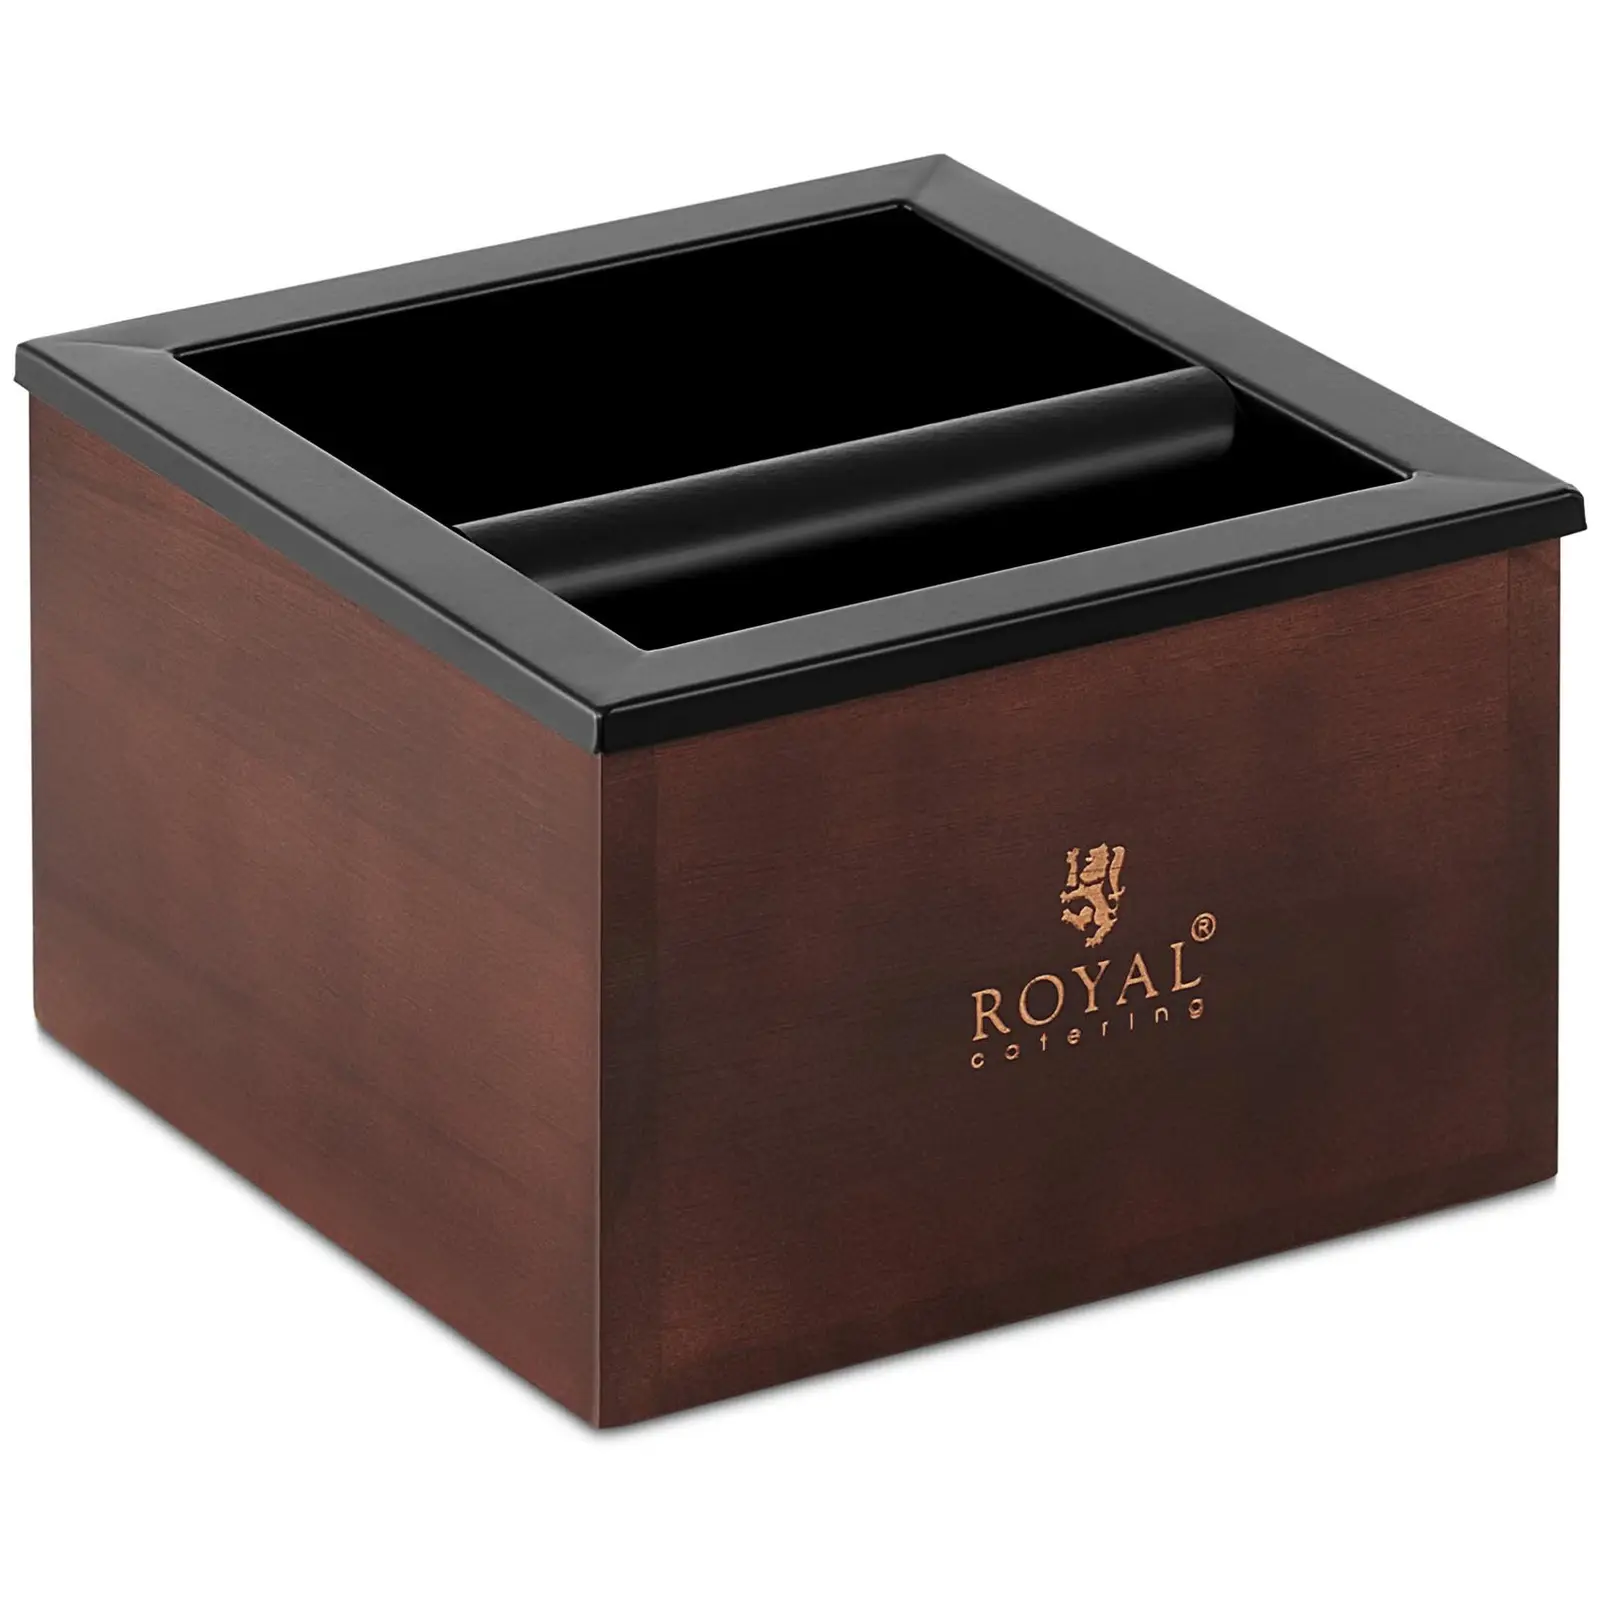 Coffee Knock Box - Stainless steel / wood - 3.1 L - with knock bar - Royal Catering